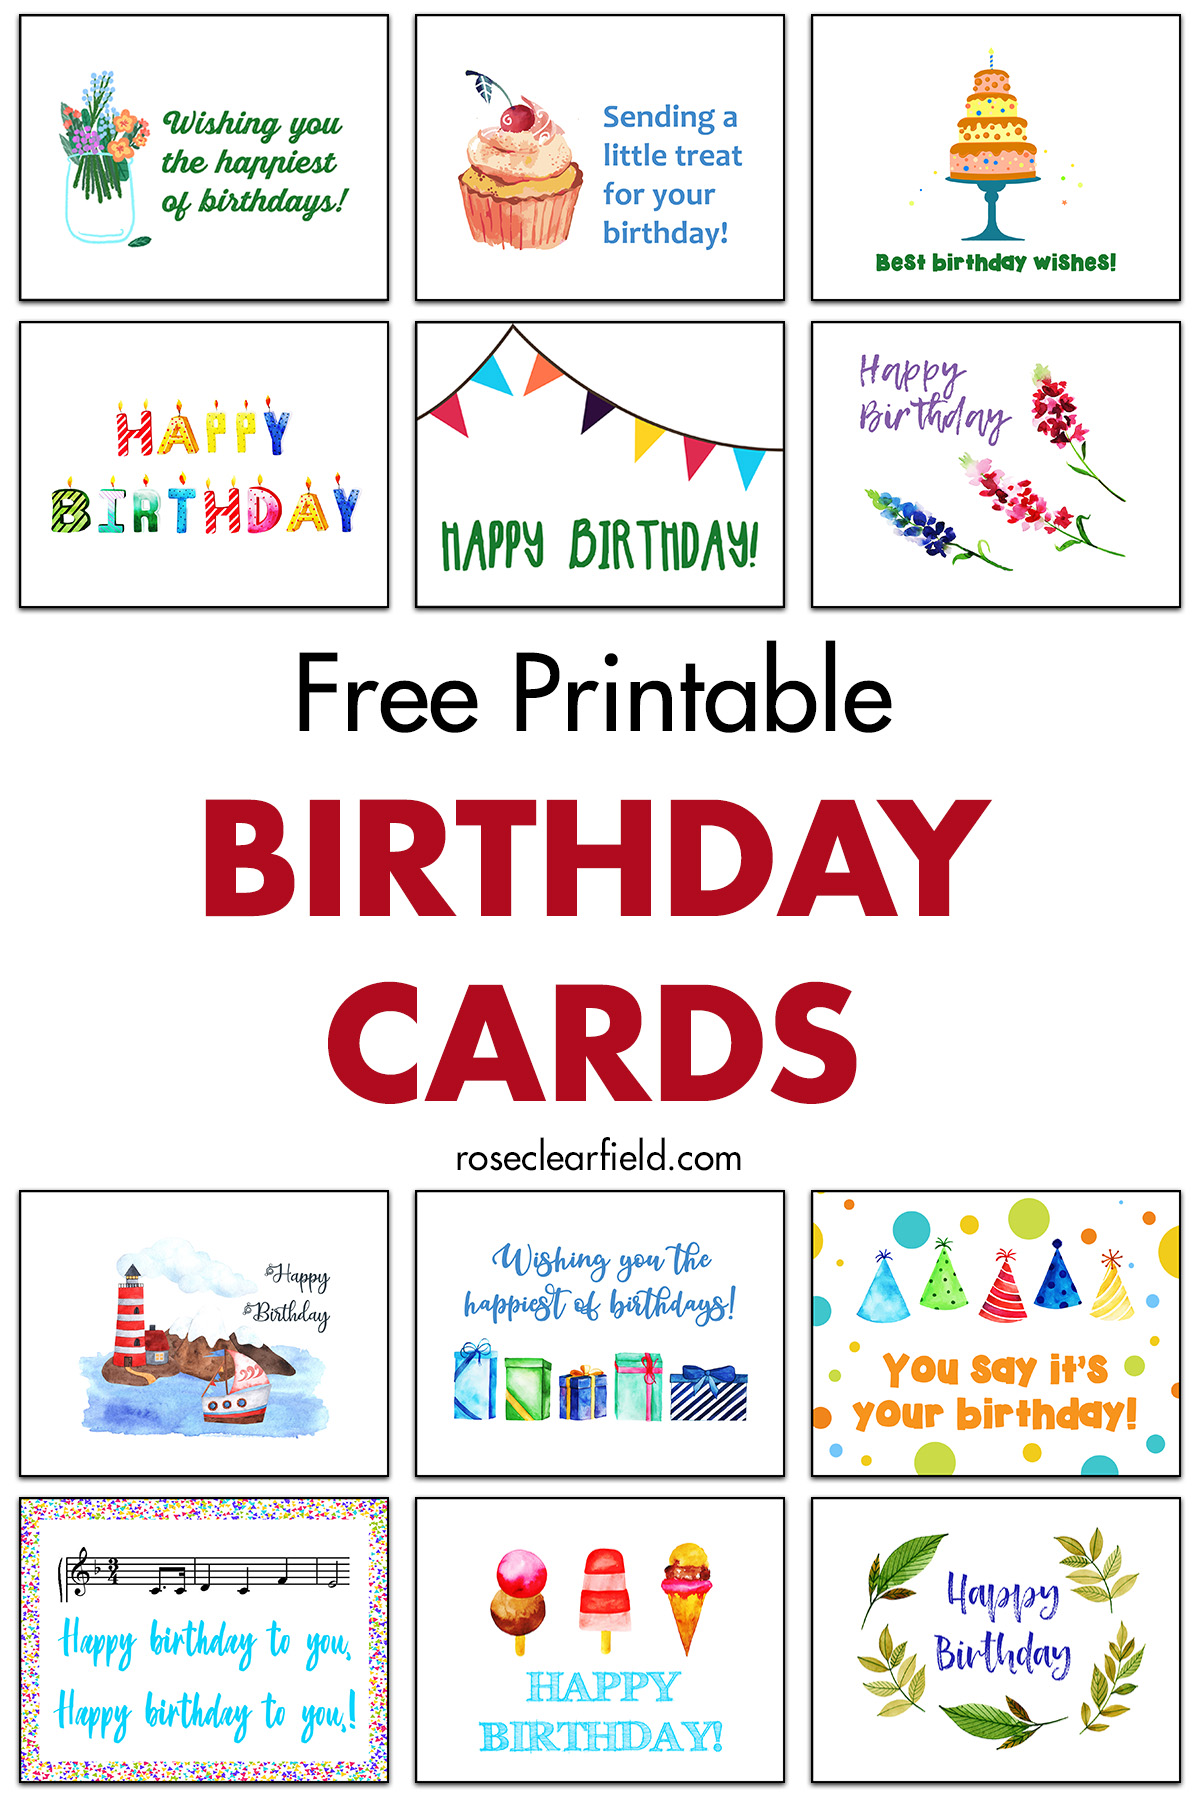 Free Printable Birthday Cards Rose Clearfield